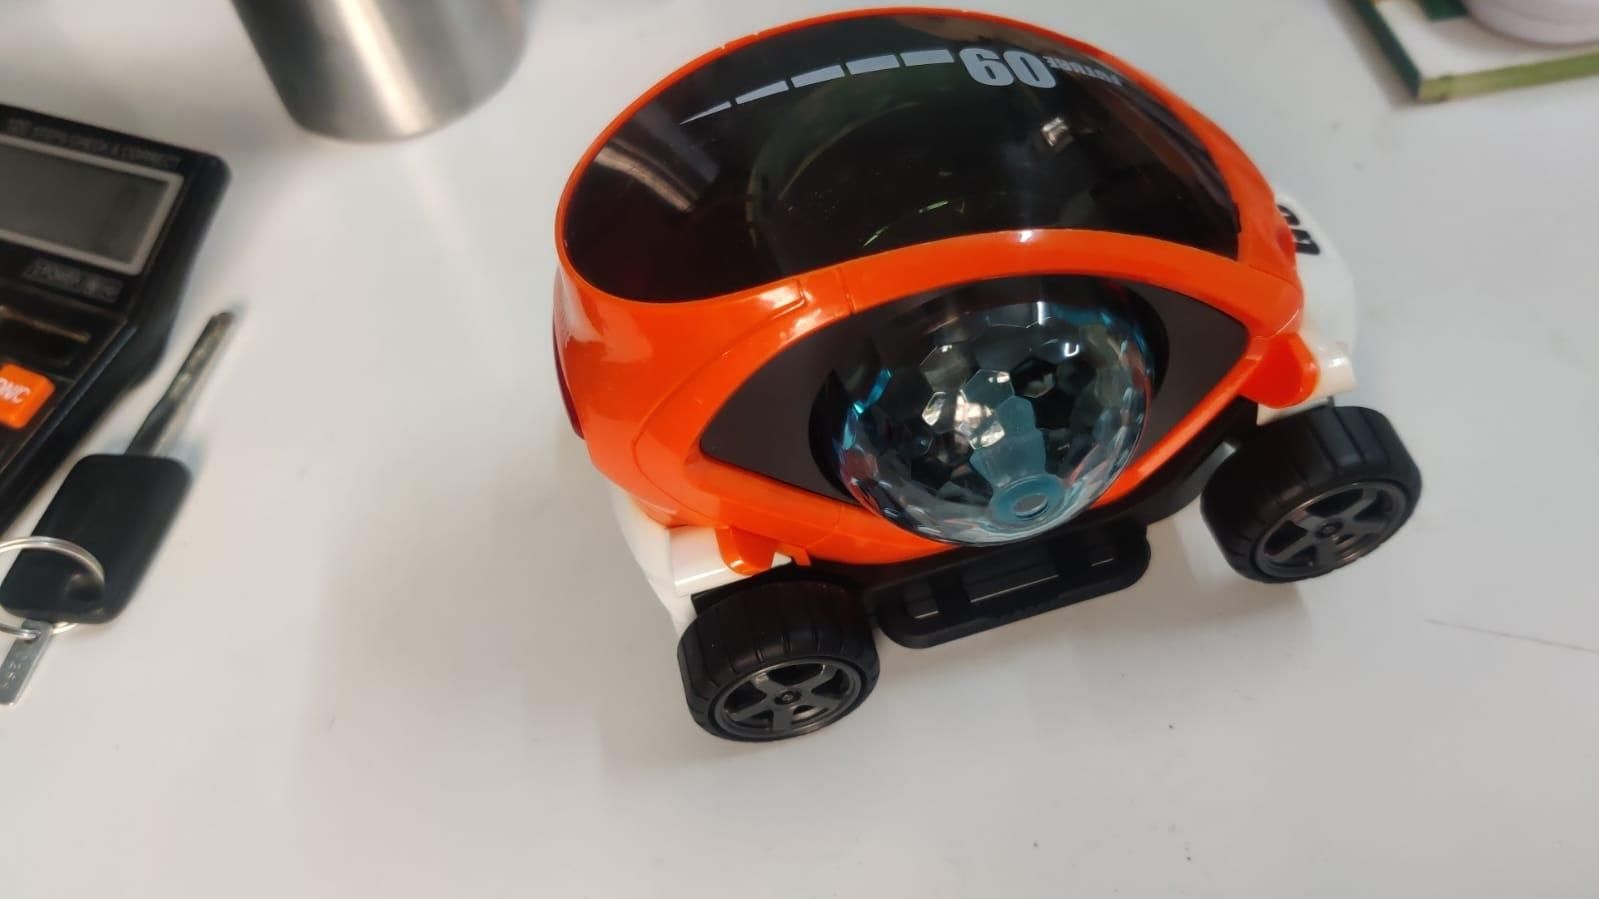 Toy Fair Lighting Car for Little Boys & Little Girls Roposo Clout